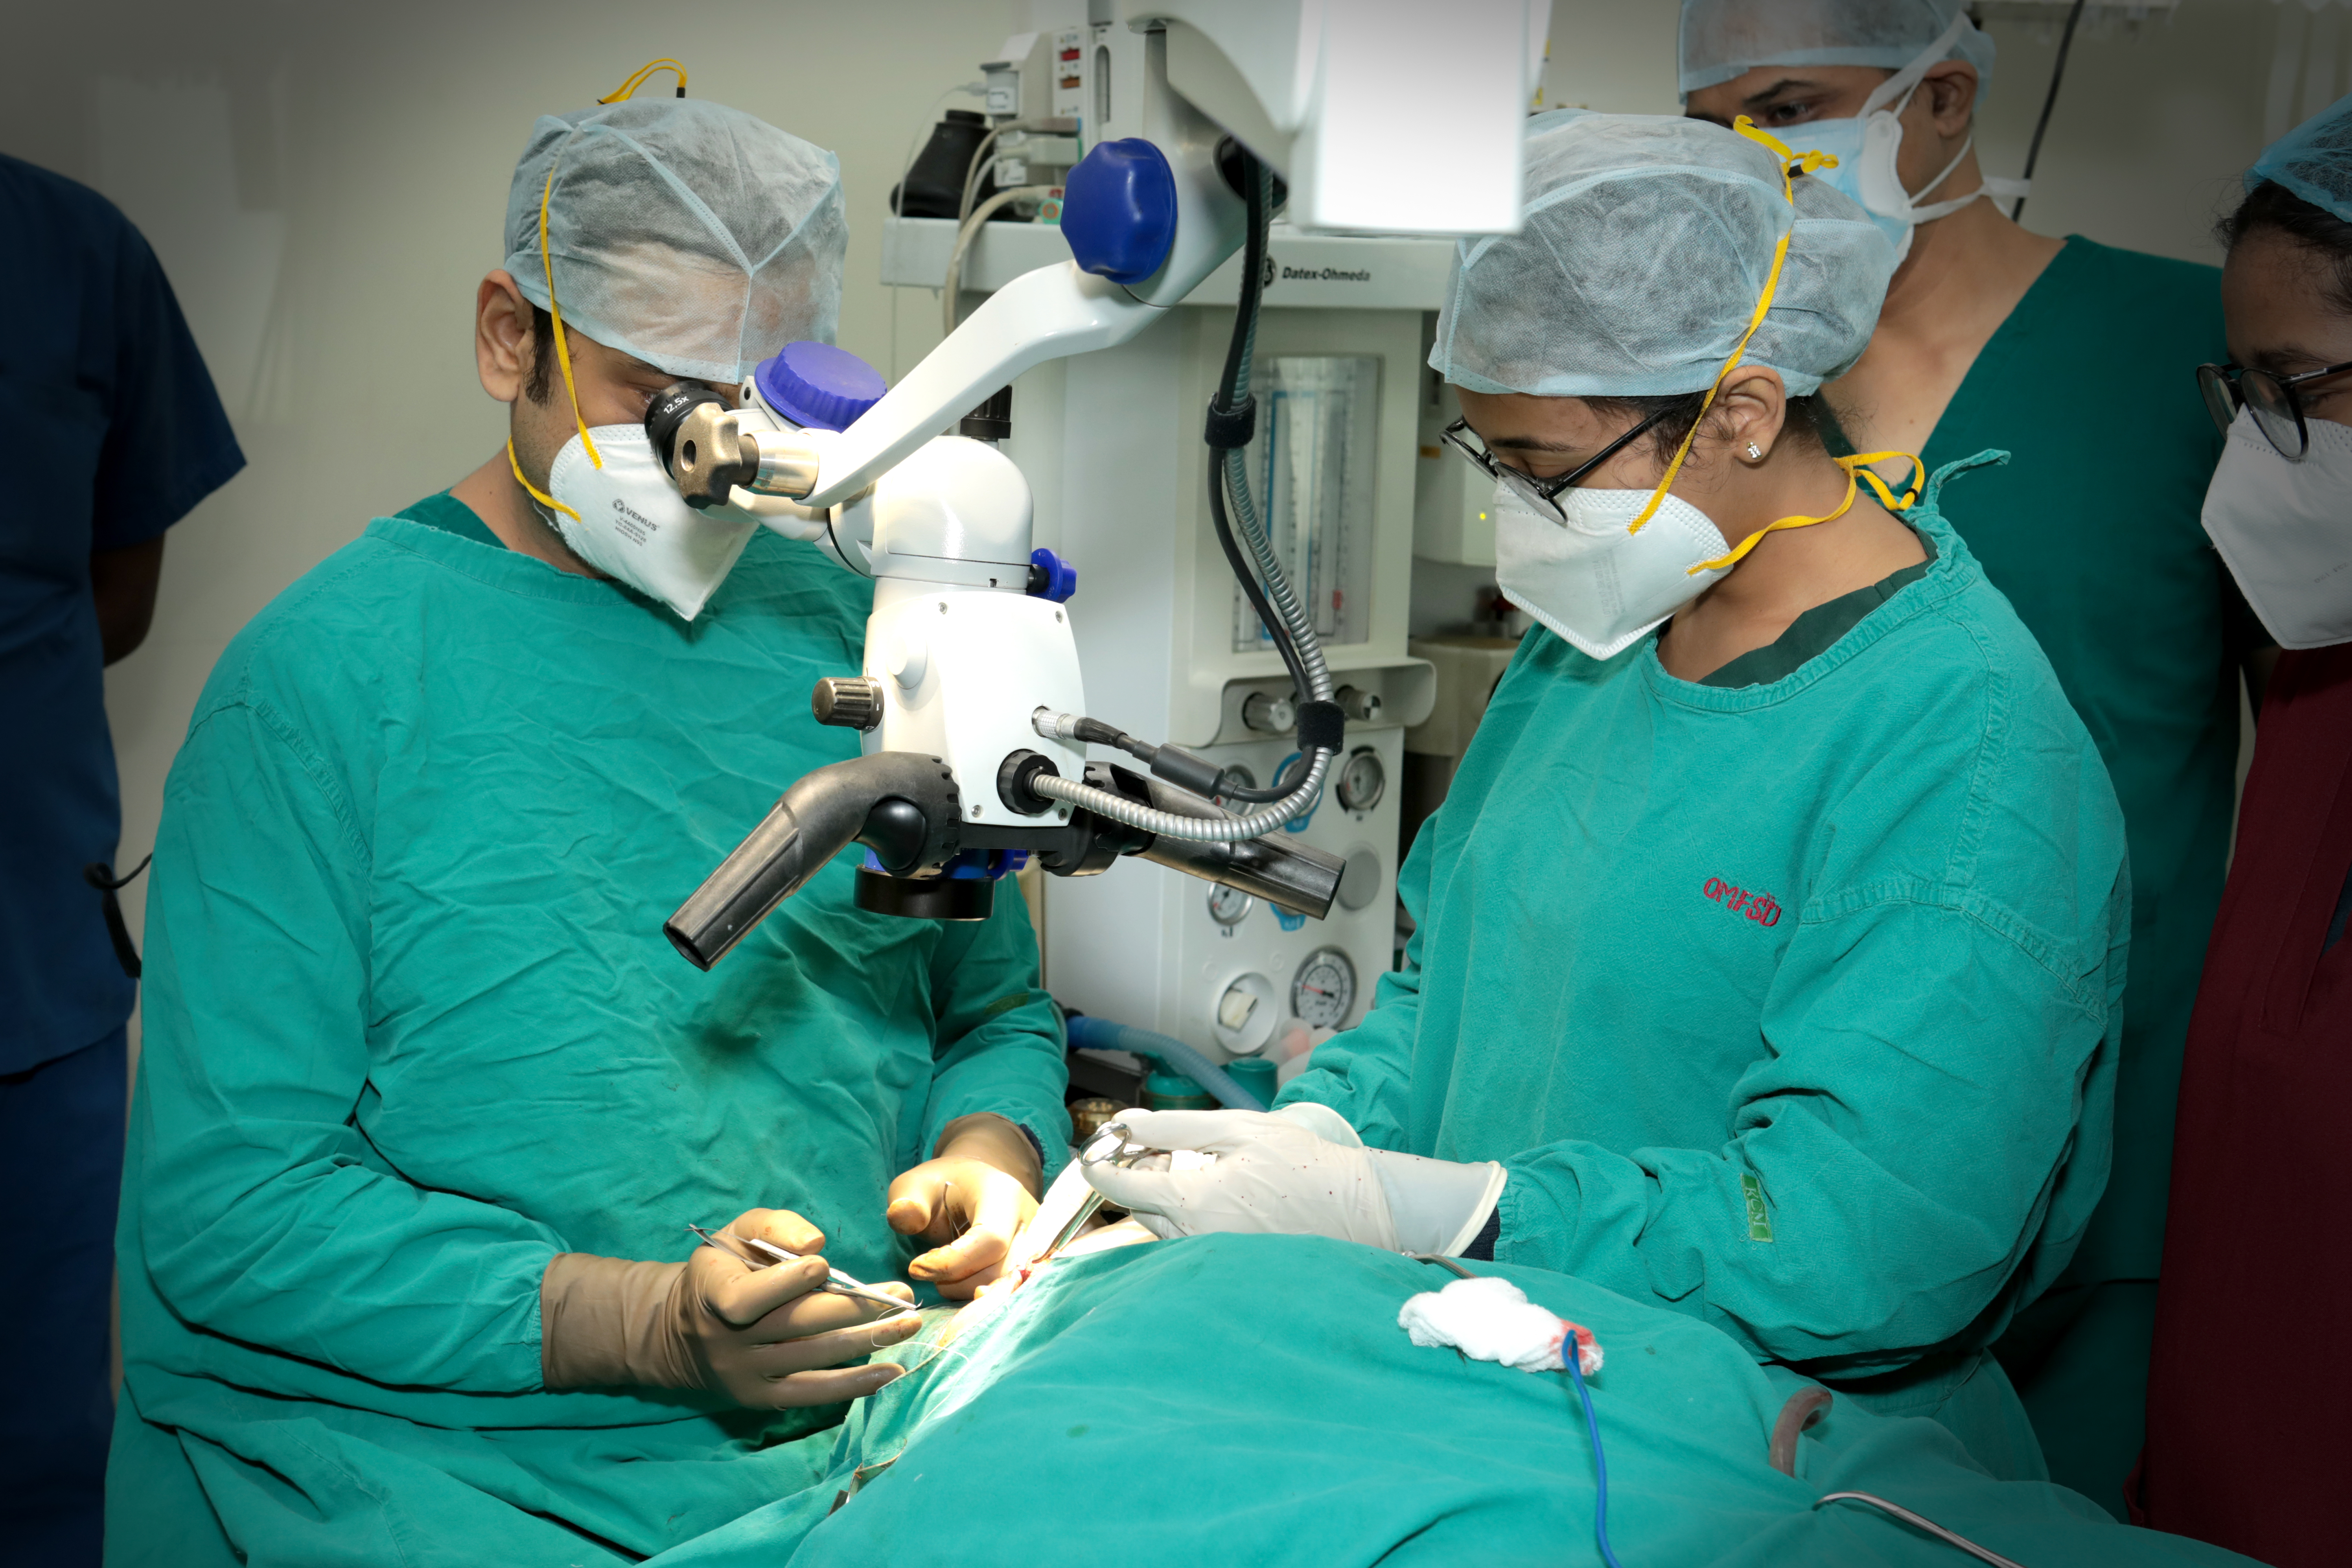 Carl Zeiss Surgical Microscope